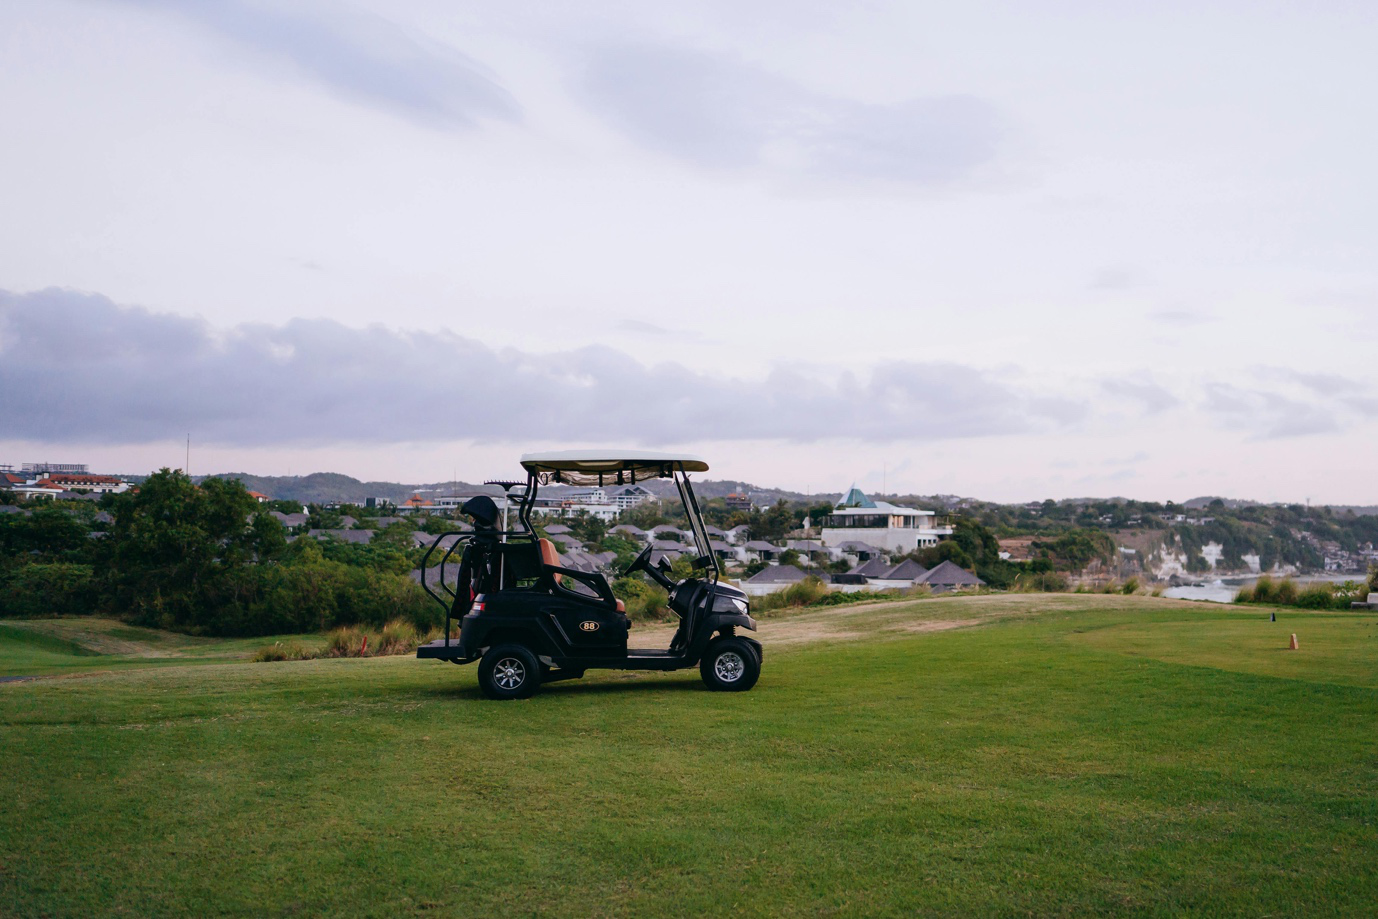 Black golf cart with safety upgrades on the course